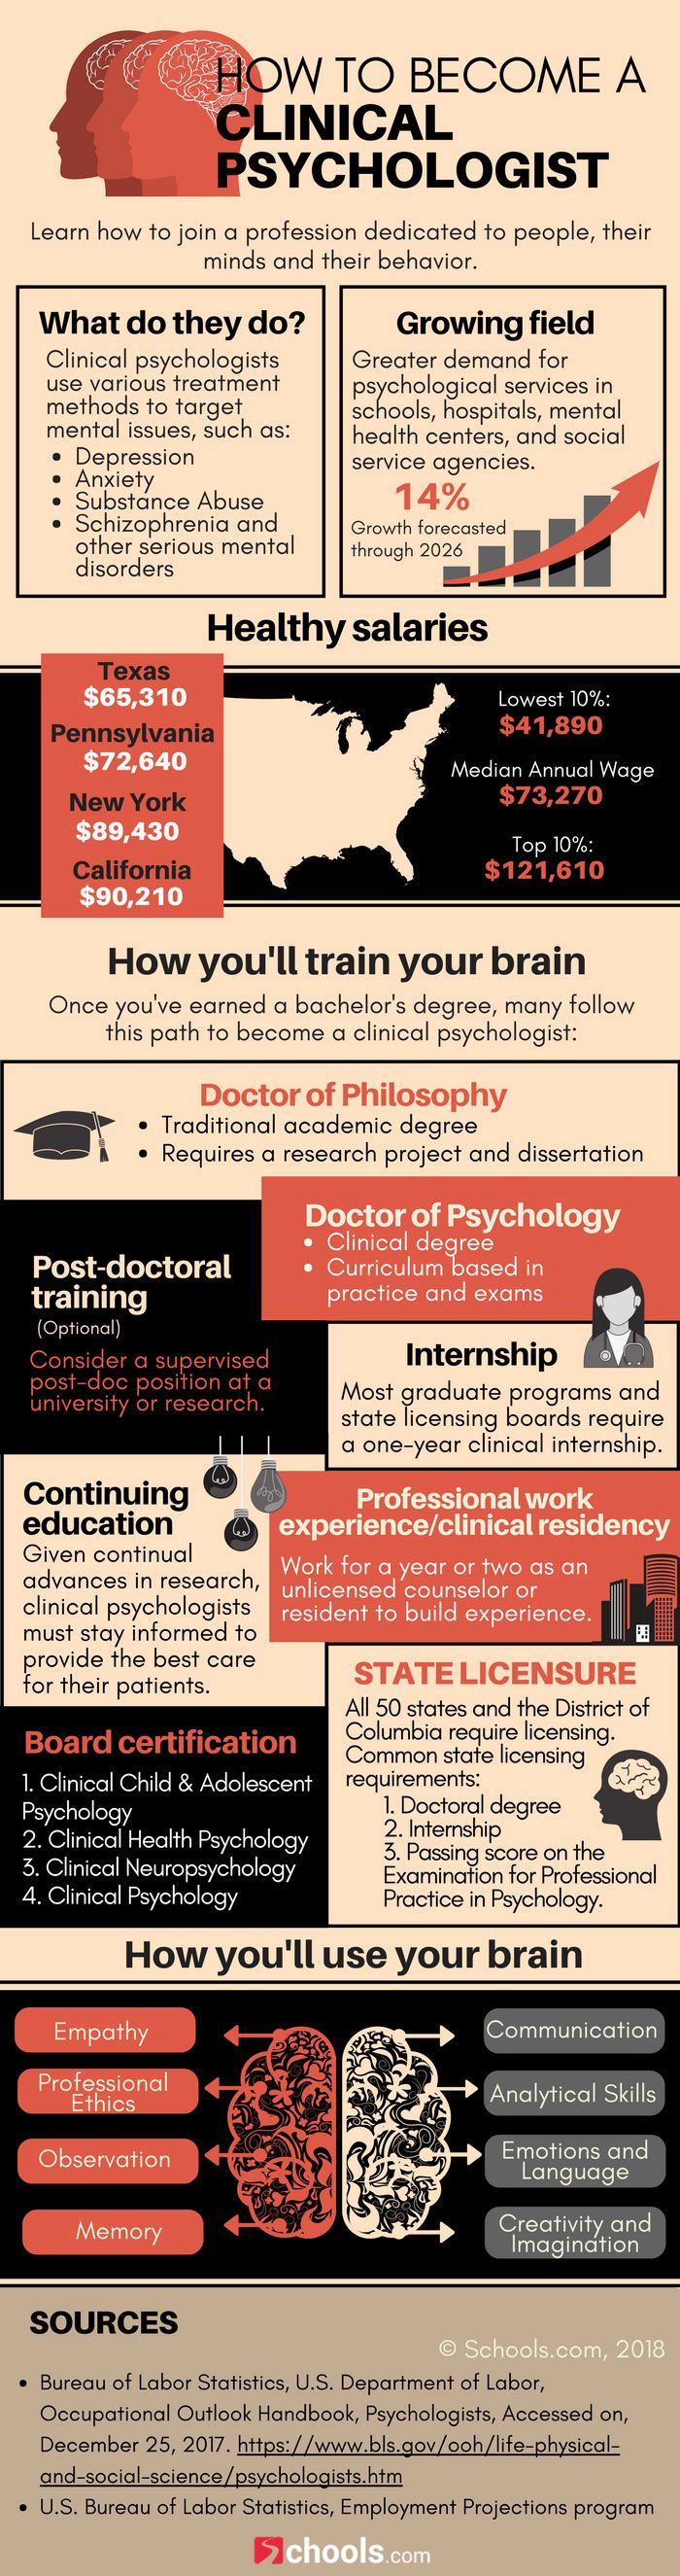 How to become a clinical psychologist